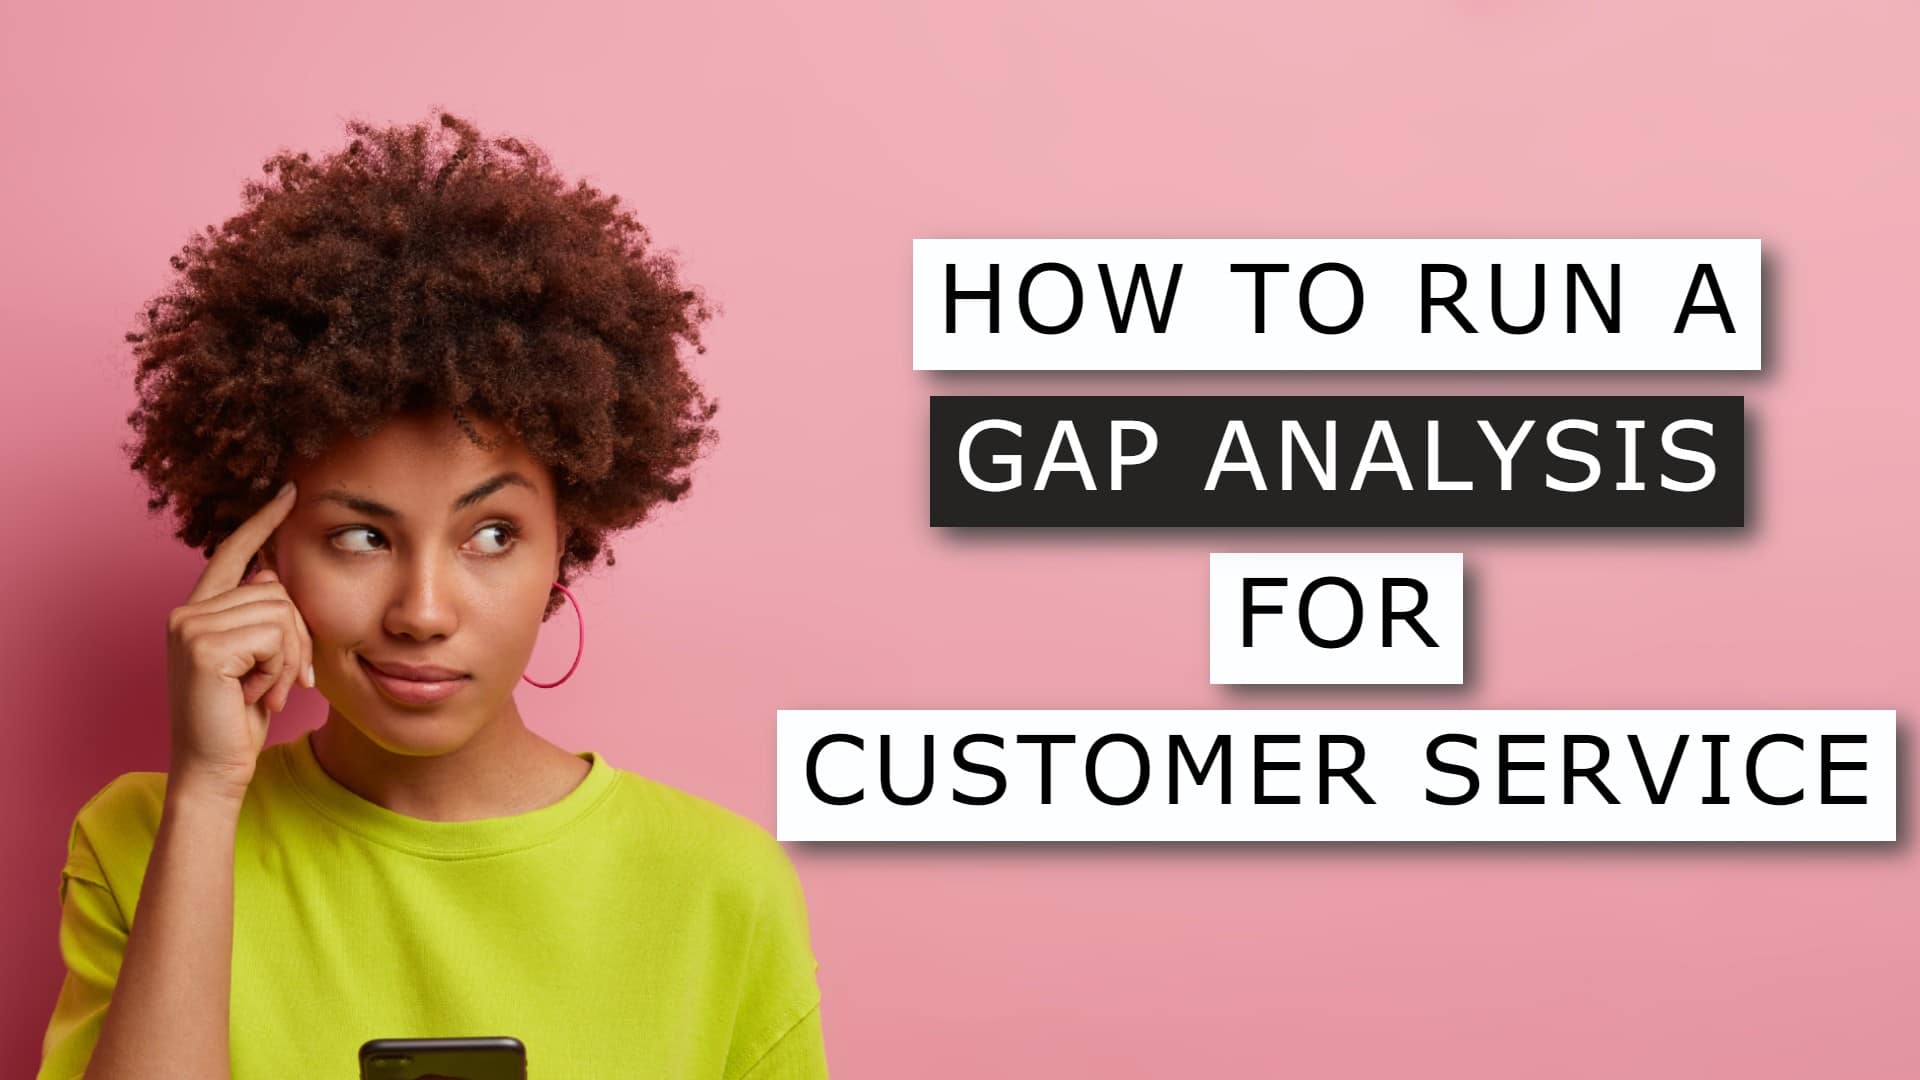 How to Run a Gap Analysis for Customer Service & Understand Customer Satisfaction